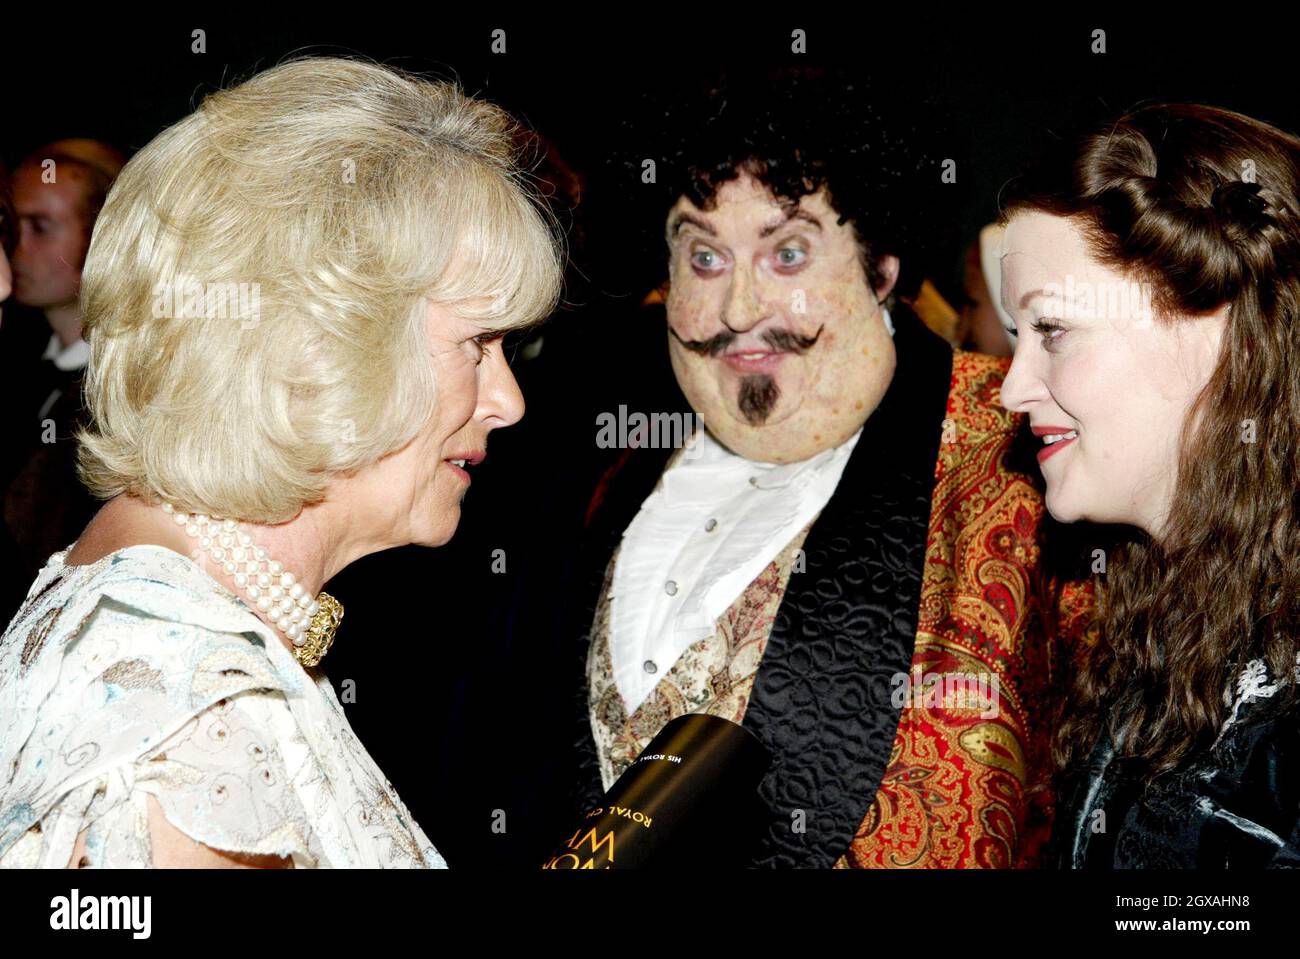 Prince Charles, accompanied by Camilla Parker-Bowles, attending the Royal  Gala Charity Performance of The Woman In White, Andrew Lloyd Webber's new  musical at the Palace Theatre, London. Anwar Hussein/allactiondigital.com  Stock Photo -